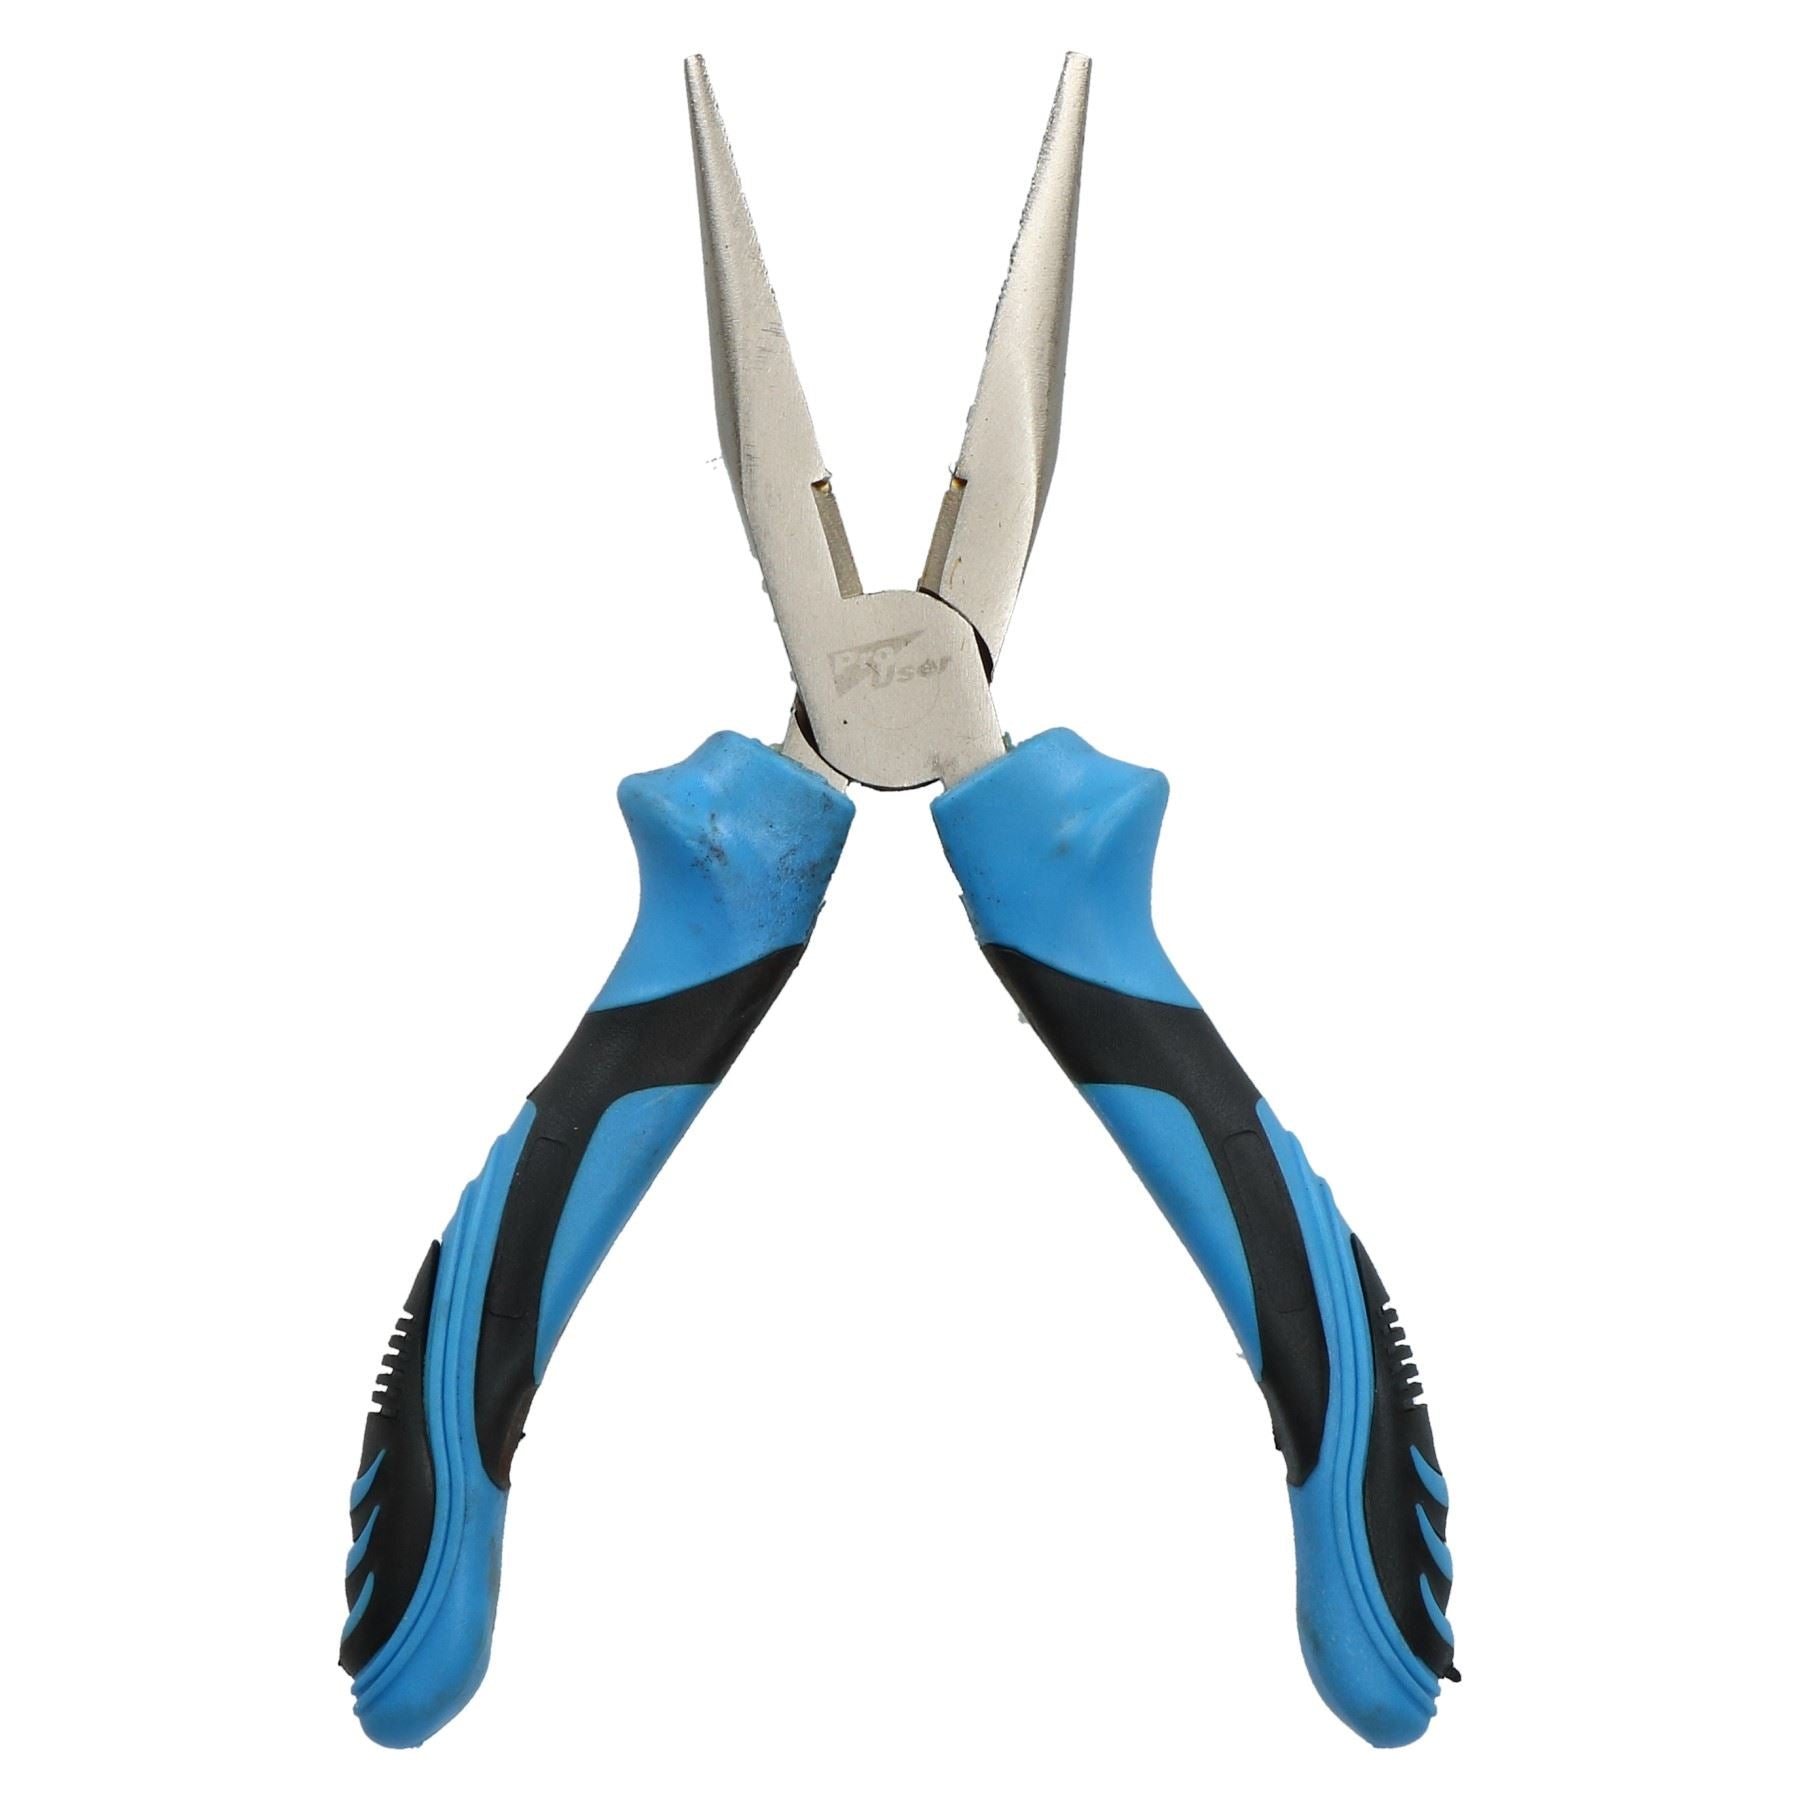 6" / 150mm Straight Long Nose Plier Pliers With Anti Slip Soft Grip Handle